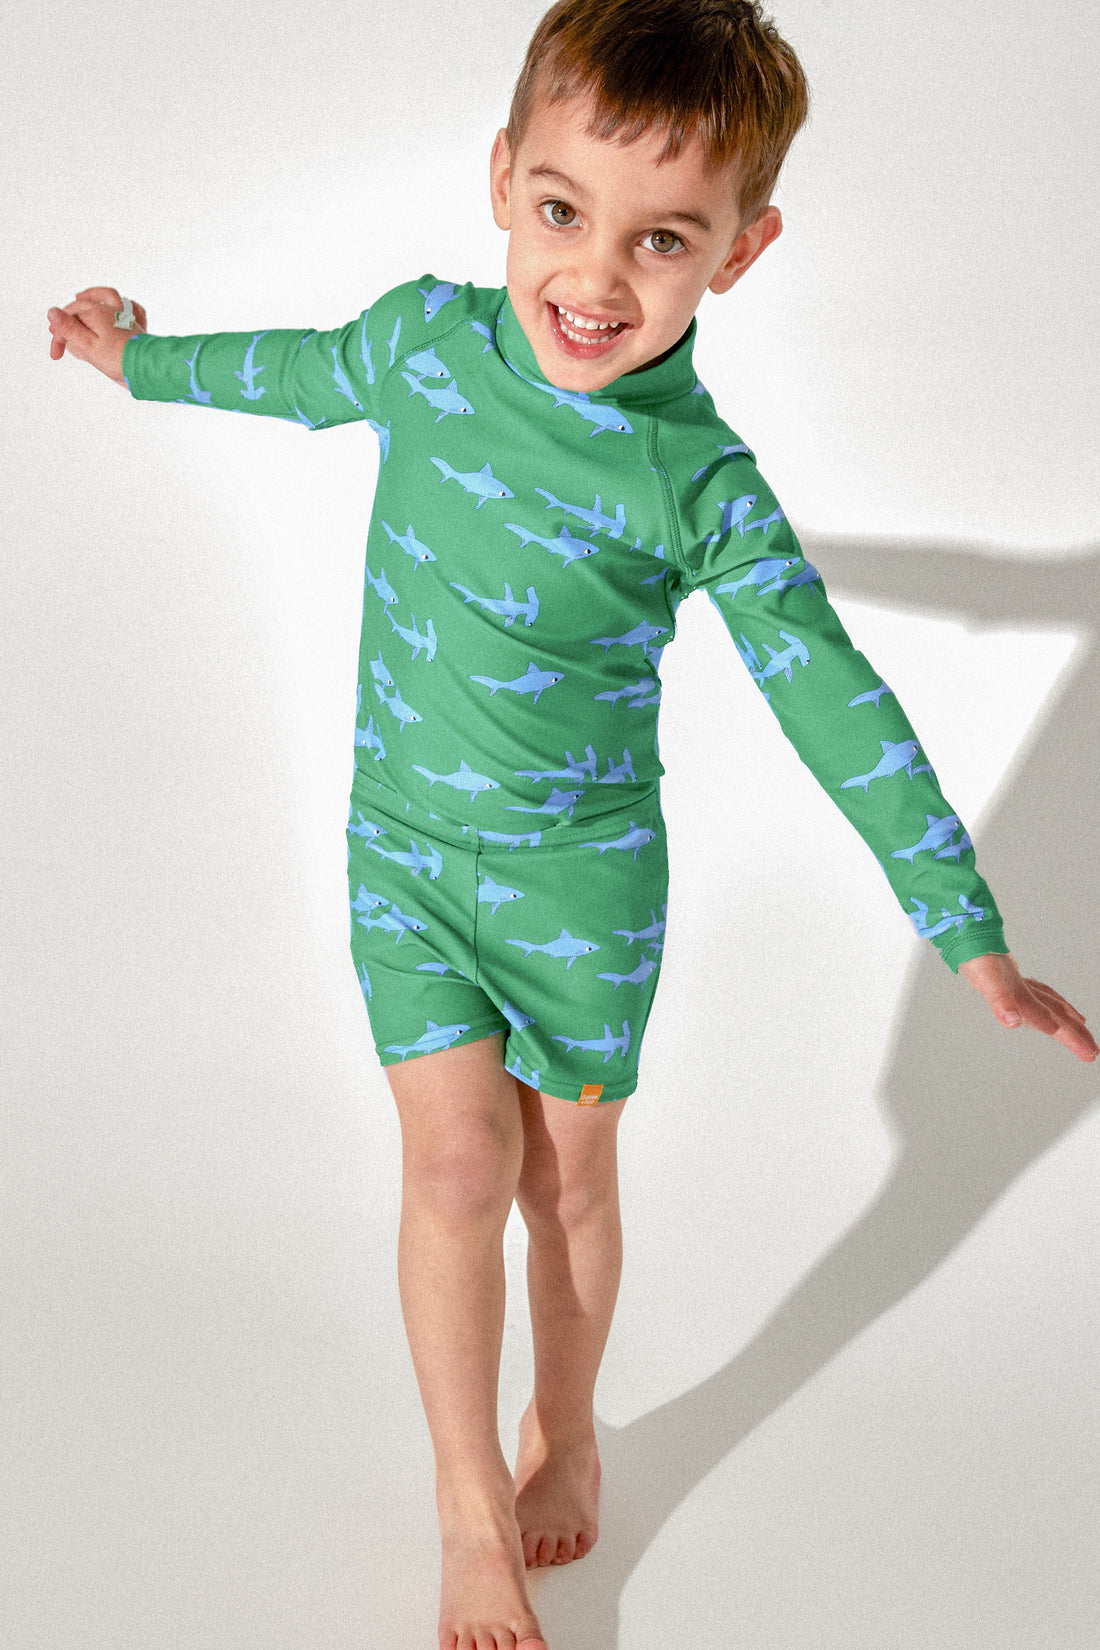 Goldie + Ace: Vintage-Style Kids, Toddler & Baby Clothing Online